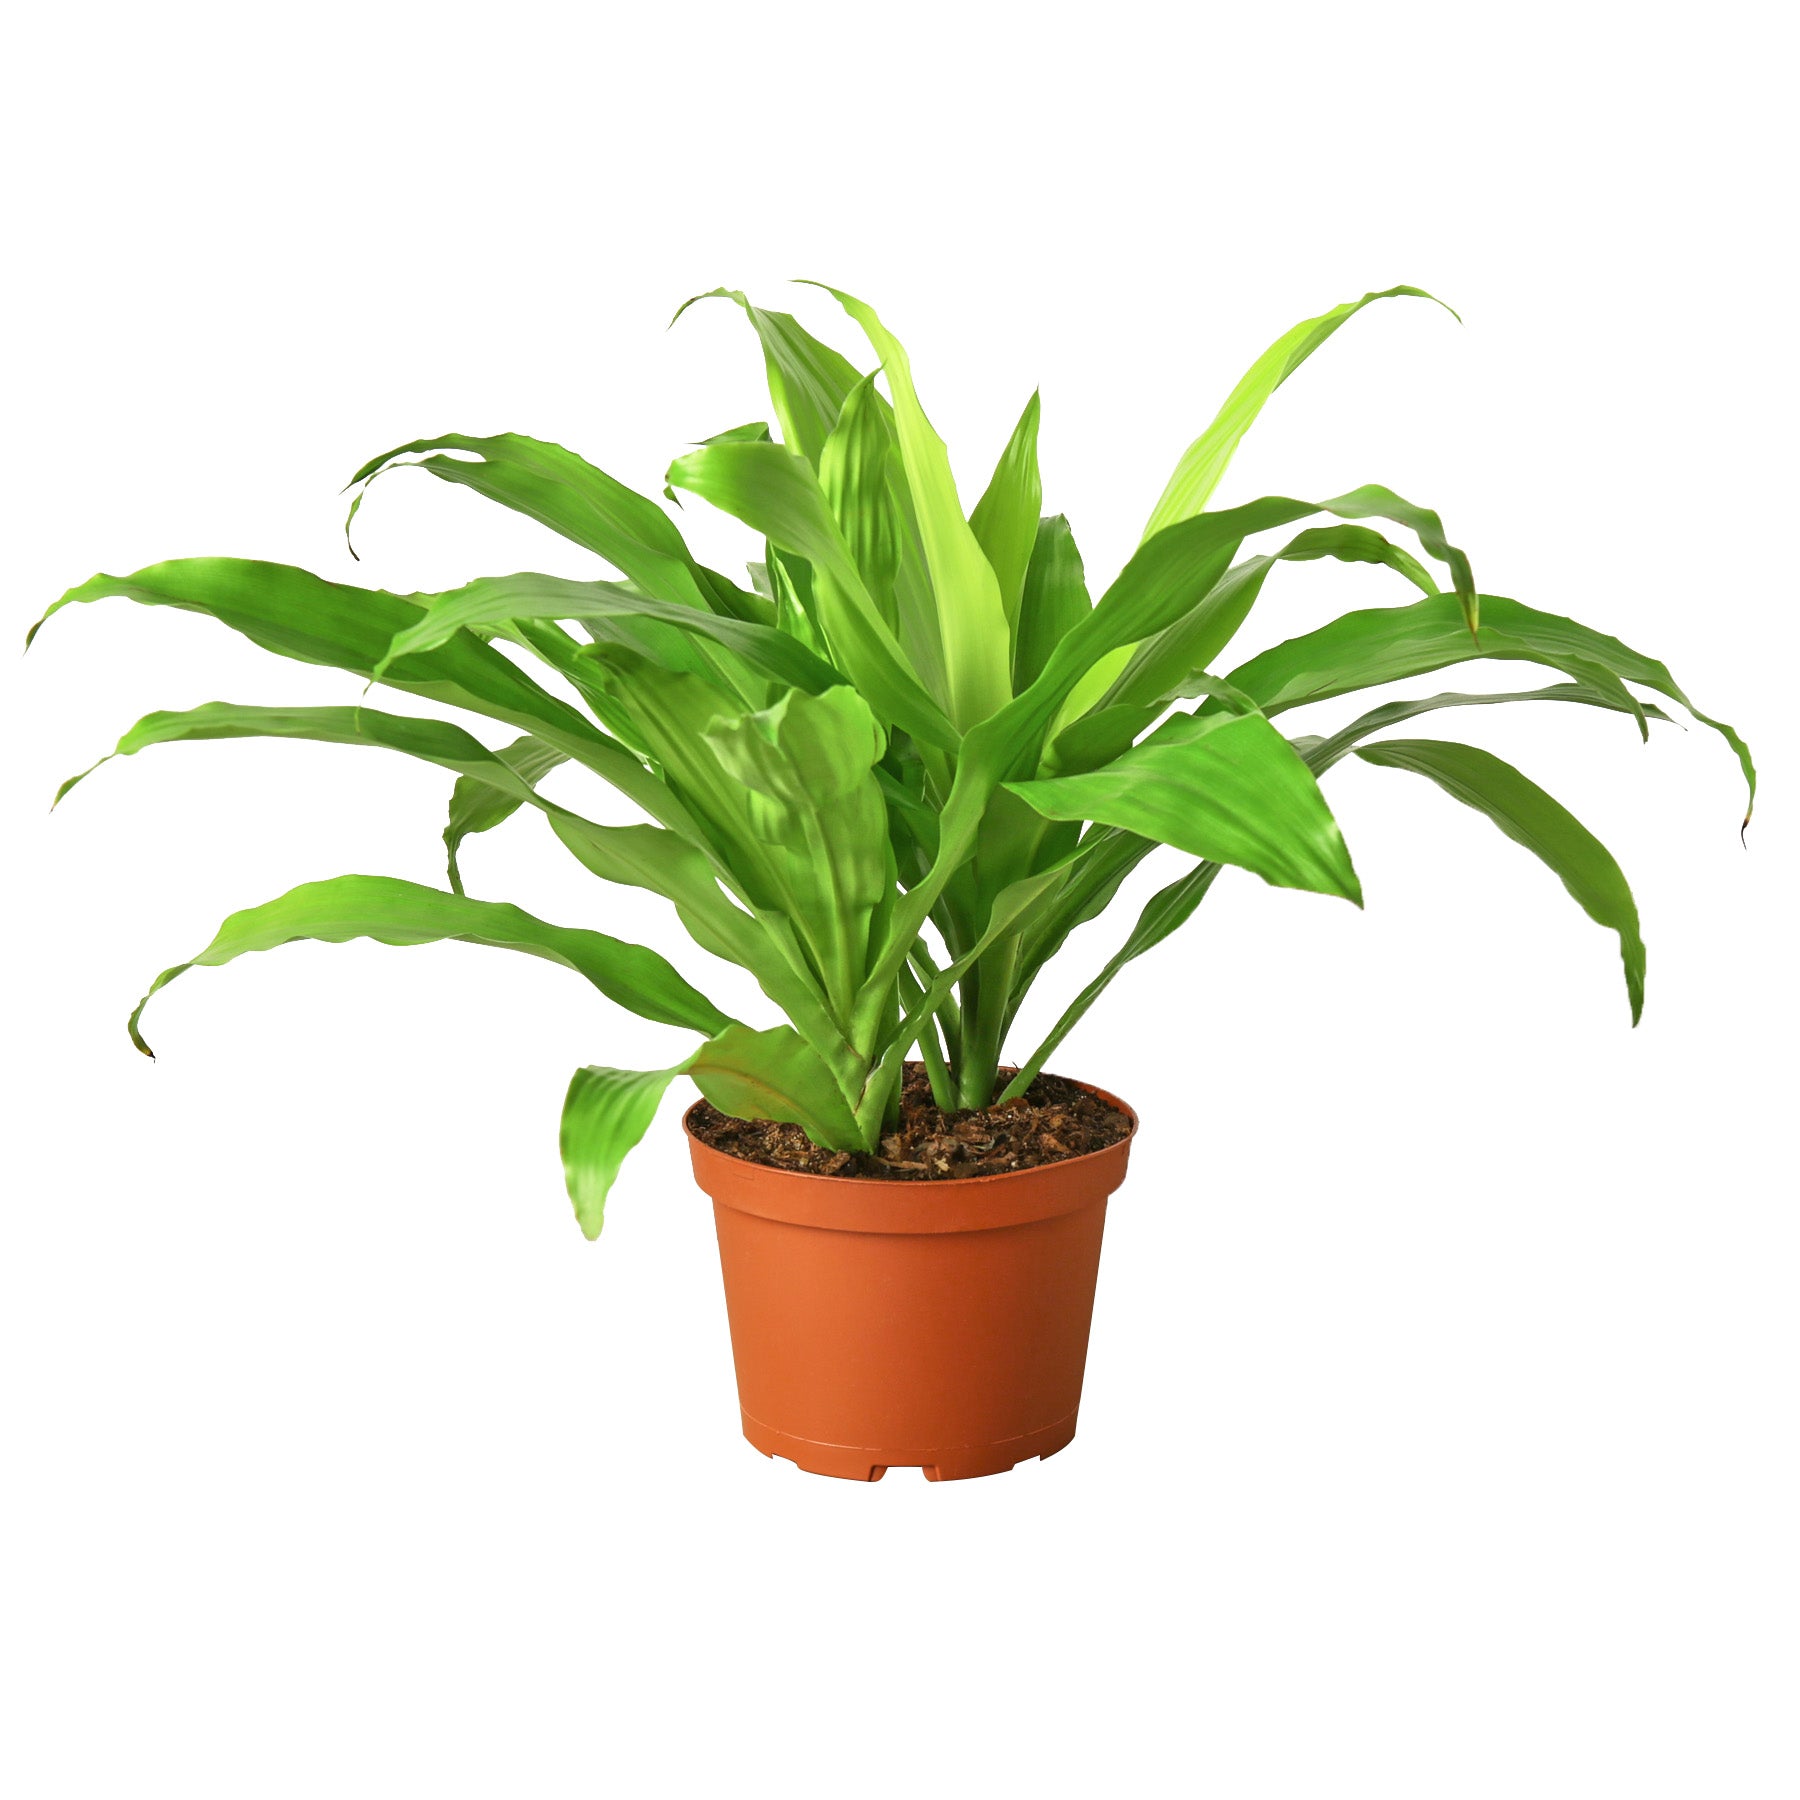 A beautiful plant in a pot displayed against a clean white background for a stunning aesthetic.